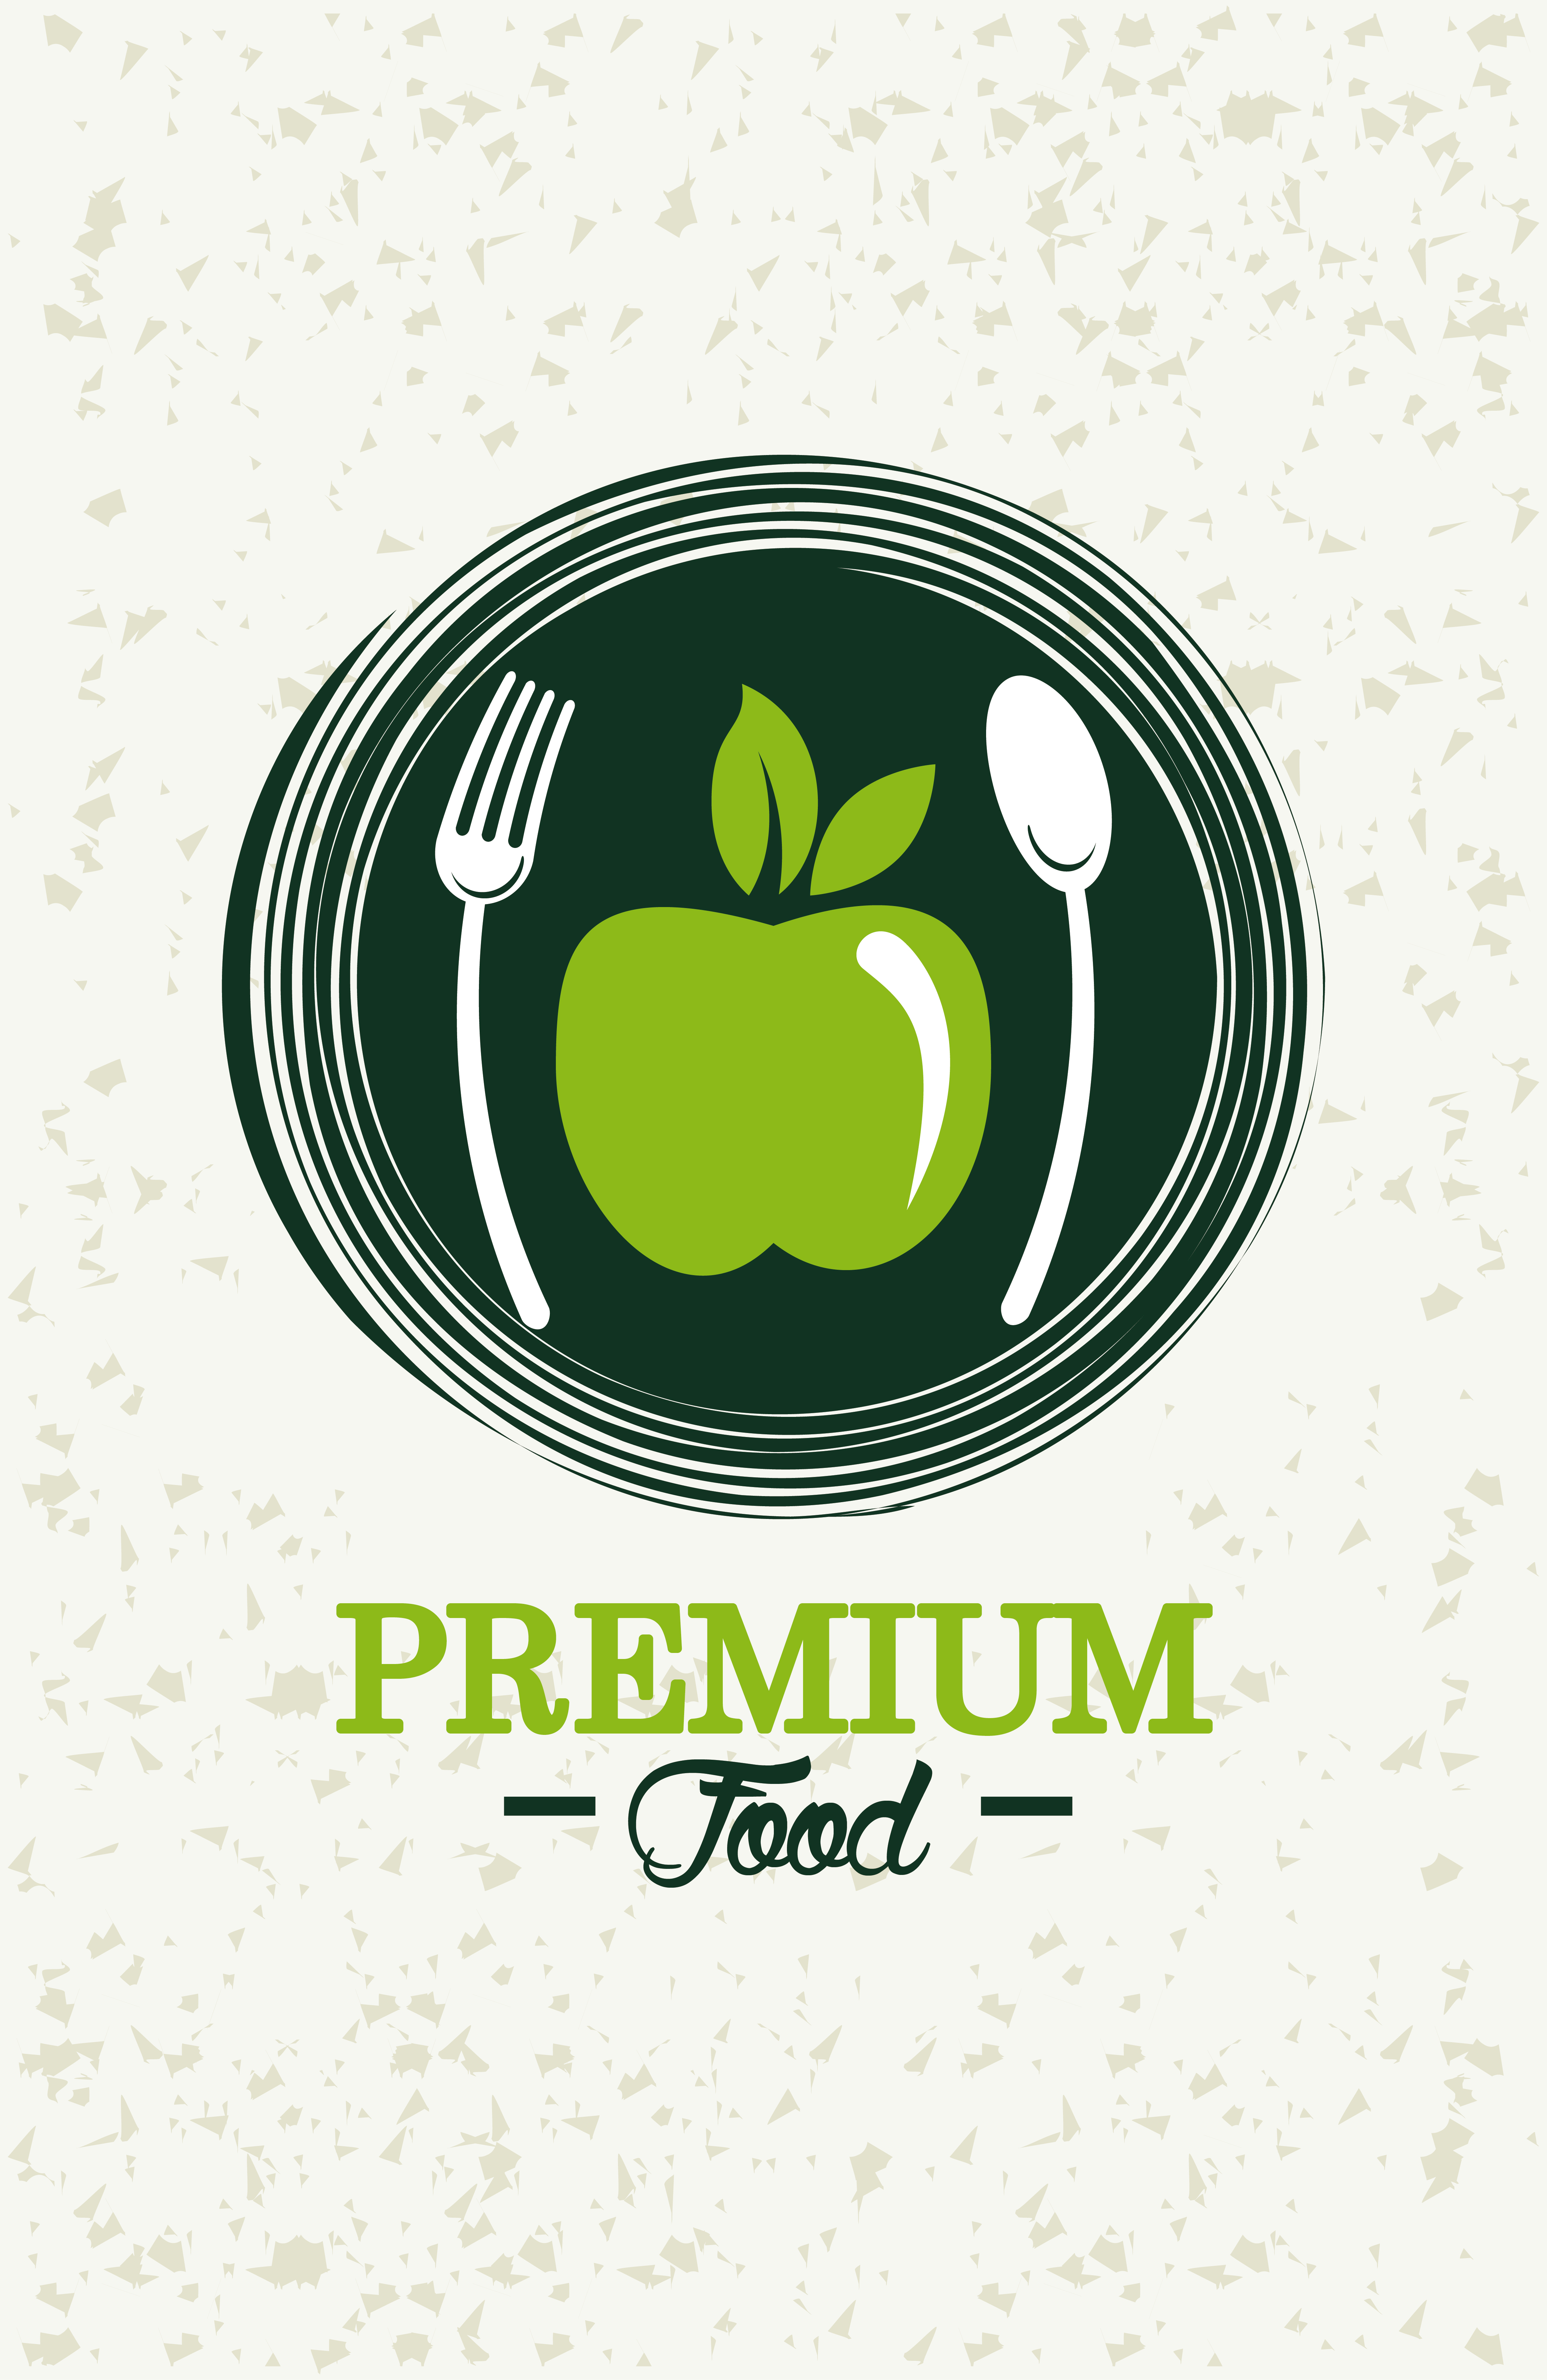 https://static.vecteezy.com/system/resources/previews/002/459/411/original/premium-and-healthy-food-poster-with-apple-and-cutleries-vector.jpg